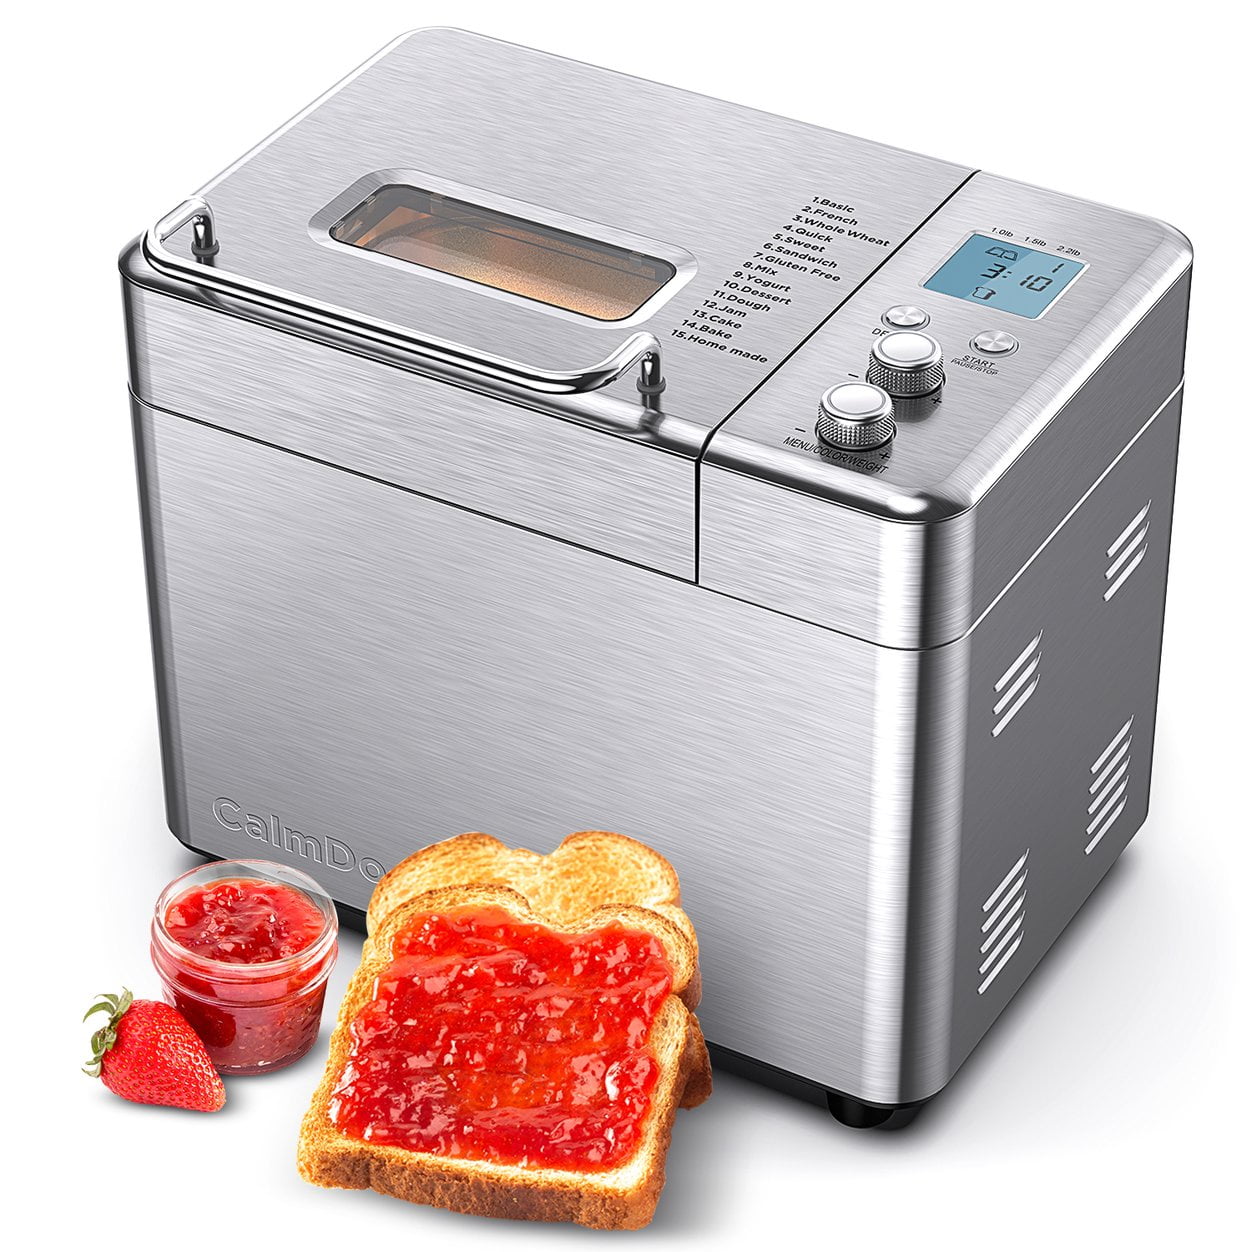 Details about   Stainless Steel Automatic Bread Maker Machine Keep Warm Nut Dispenser Nonstick 